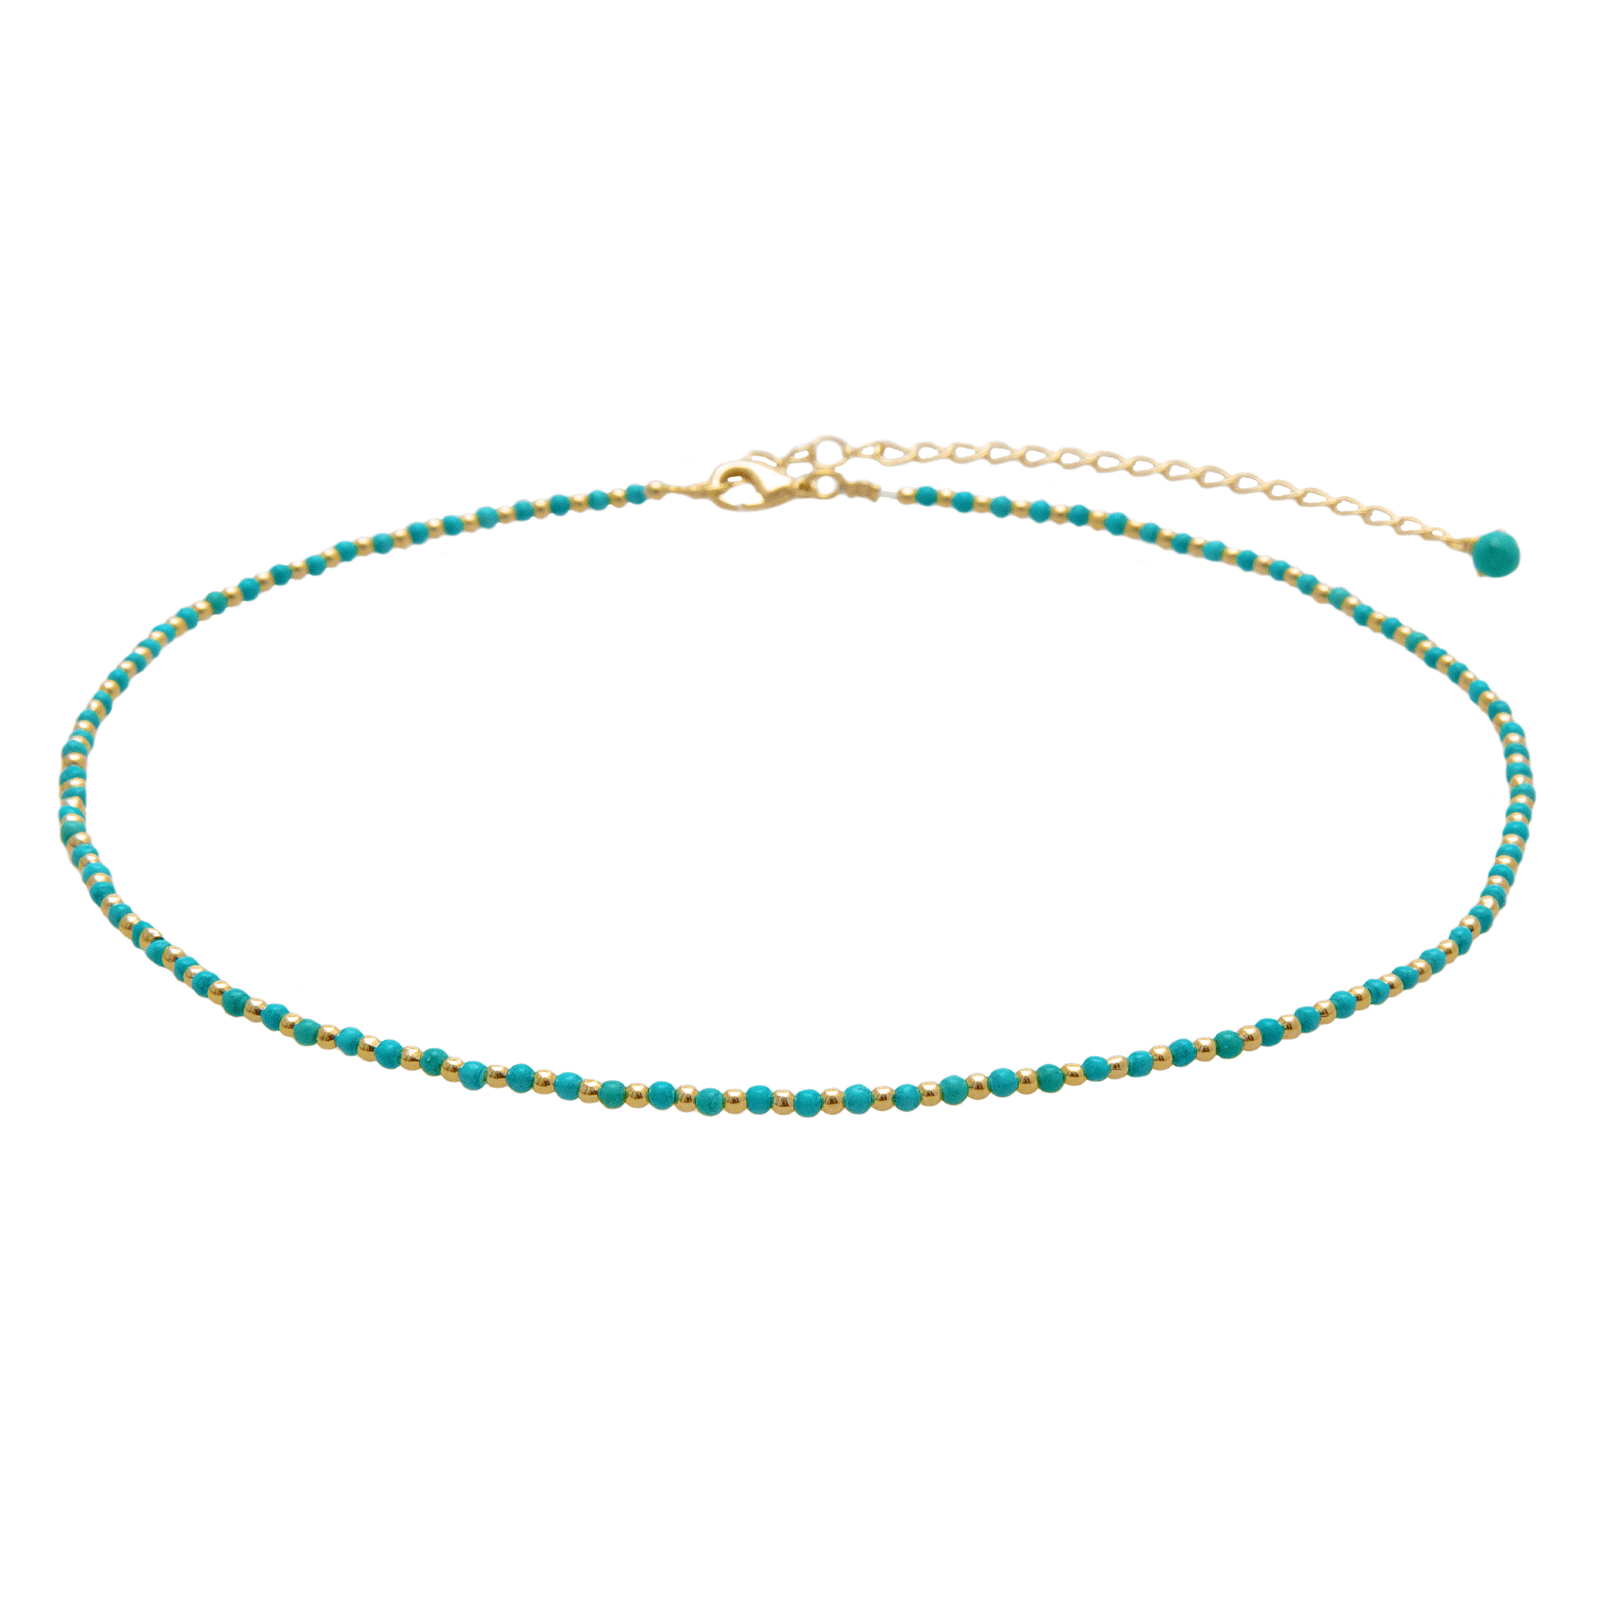 Gold chain turquoise bead necklace